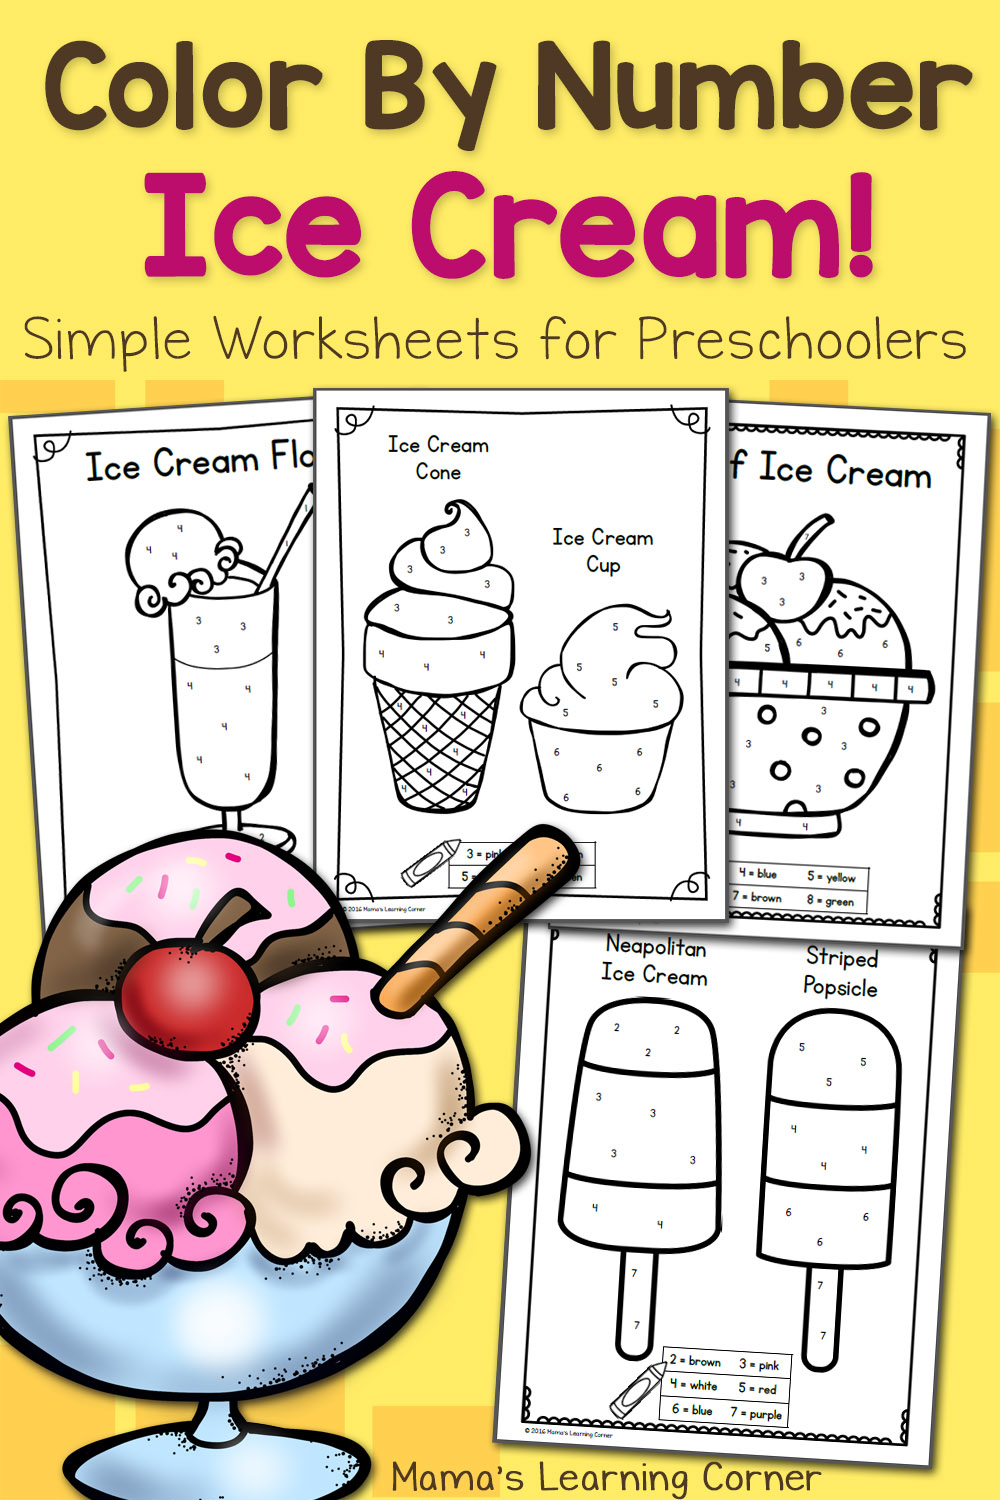 Color By Number Worksheets for Preschool: Ice Cream! - Mamas Learning